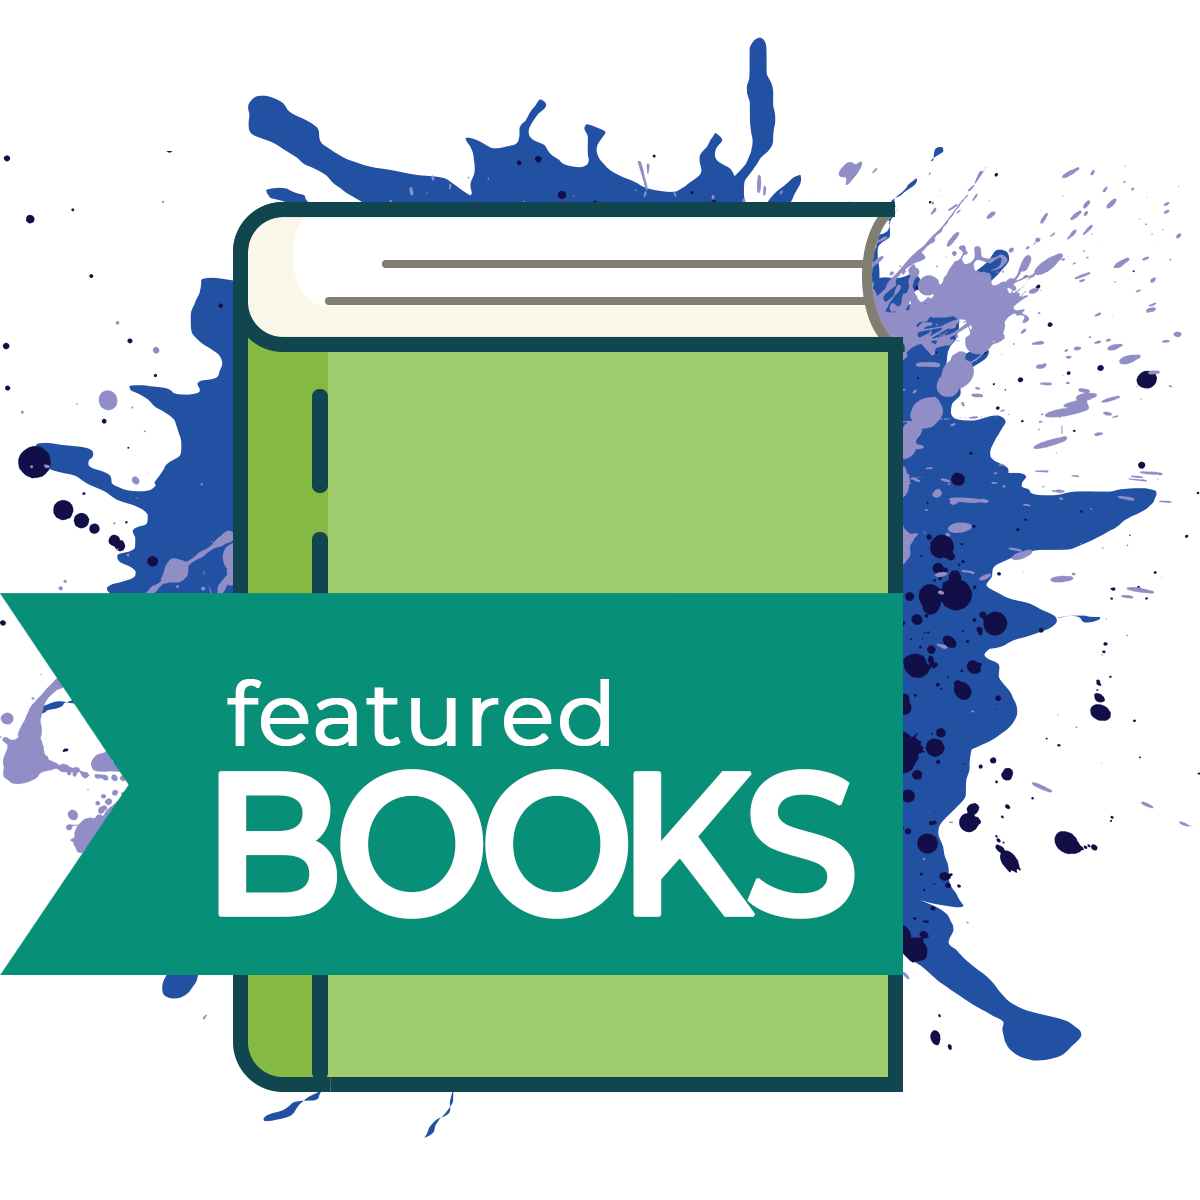 Featured books for teens icon